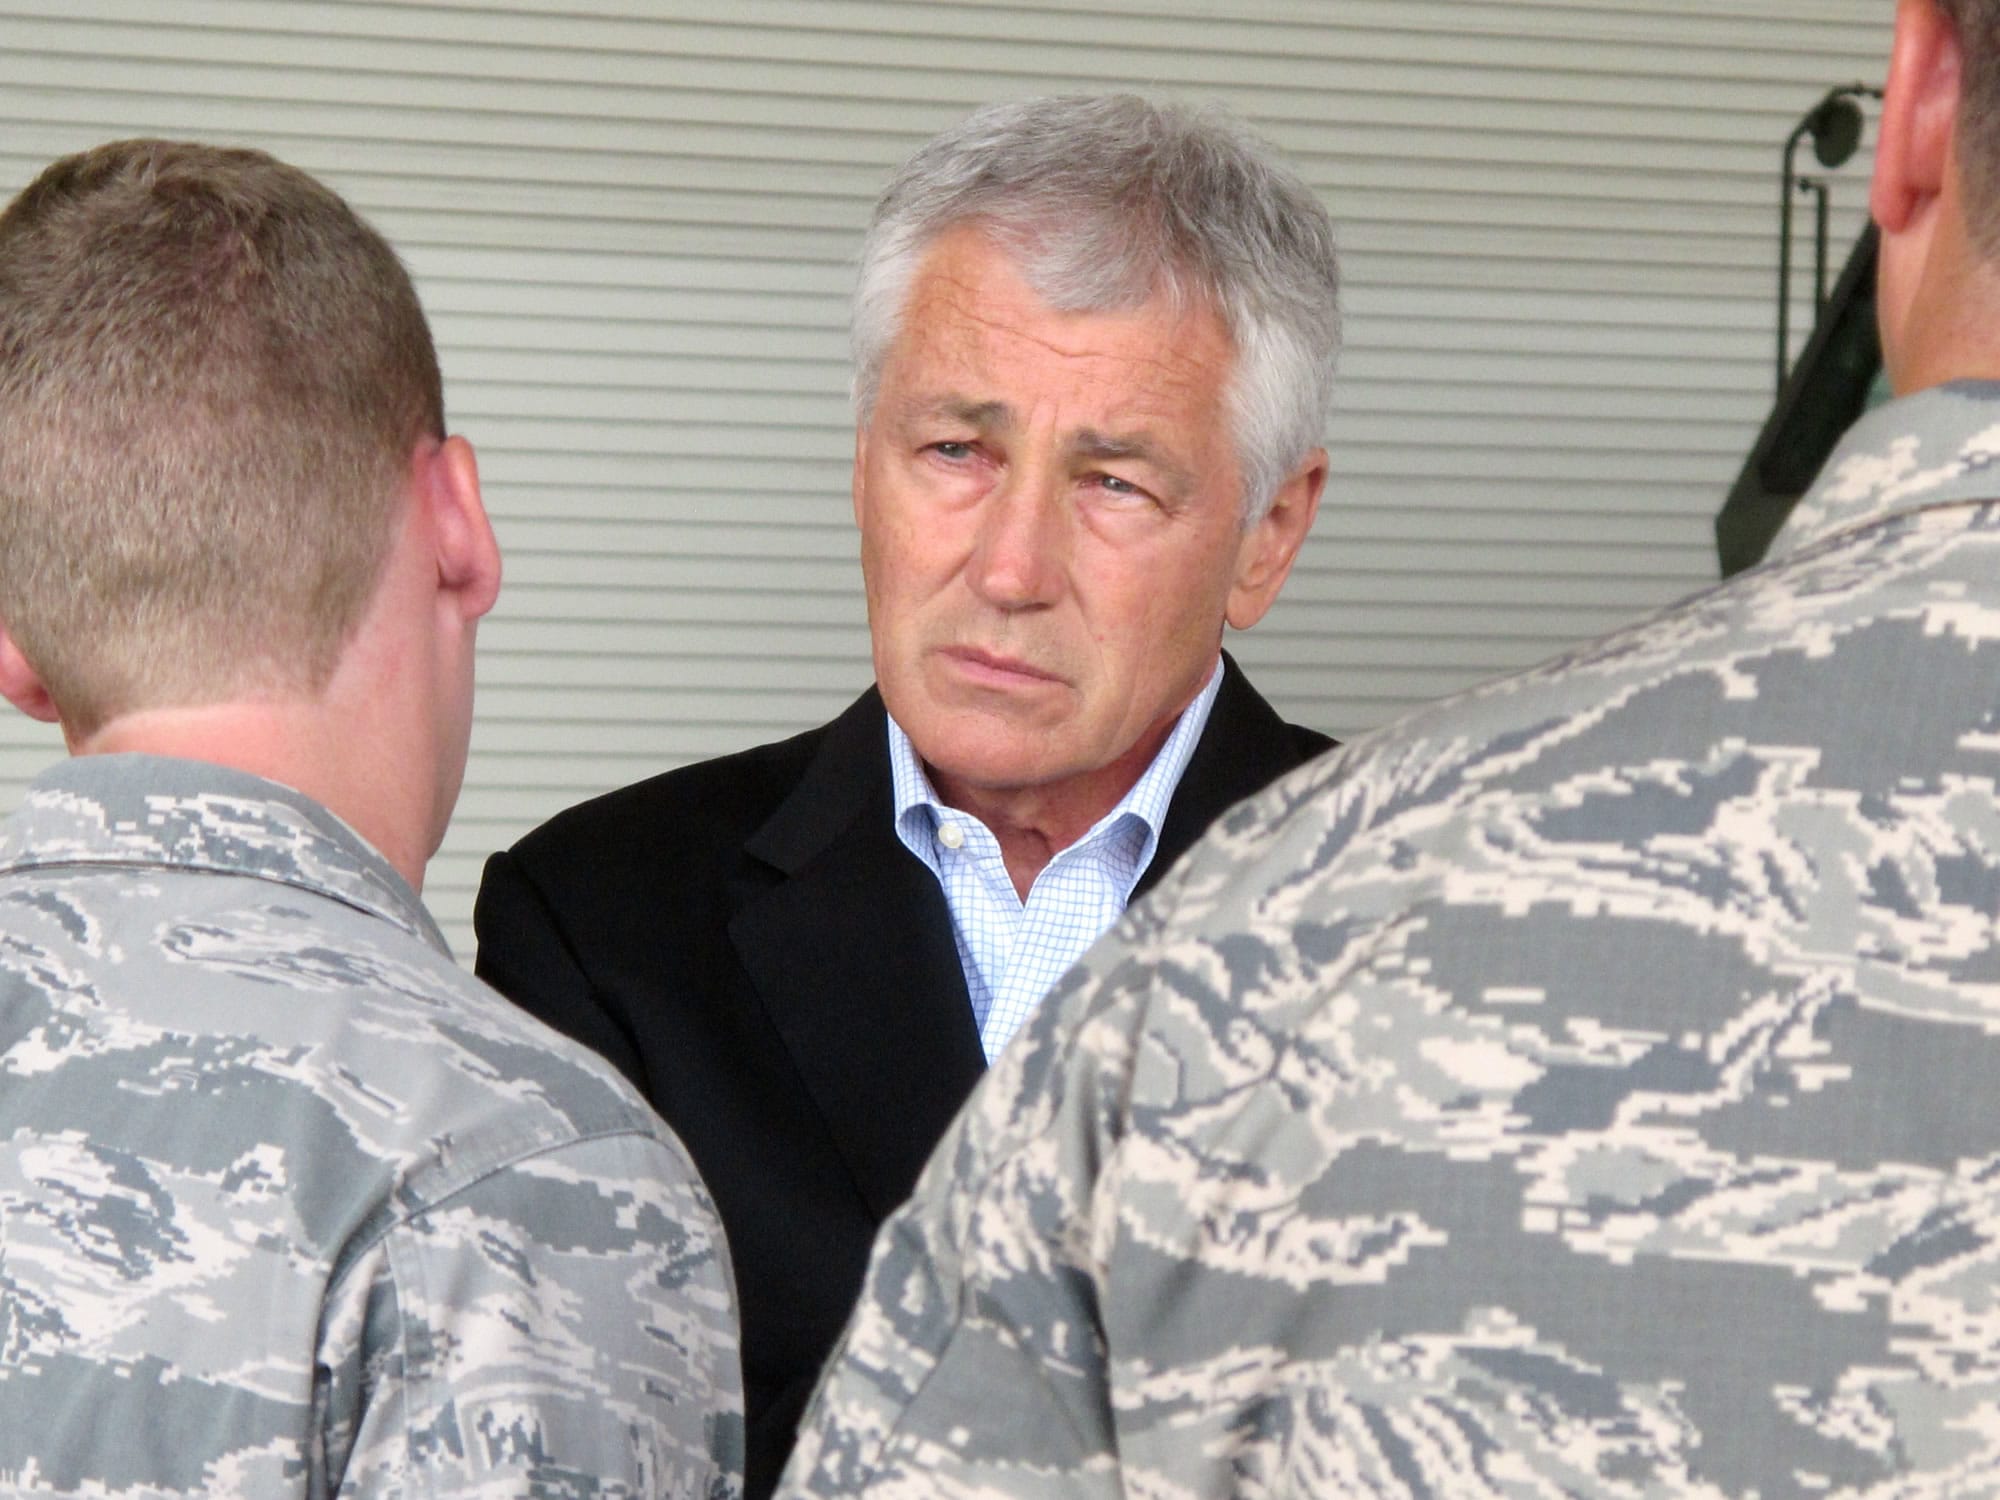 Defense Secretary Chuck Hagel talks with Air Force personnel at Joint Base Charleston near Charleston, S.C., on the last day of a three-day trip to visit bases in the Carolinas and Florida.